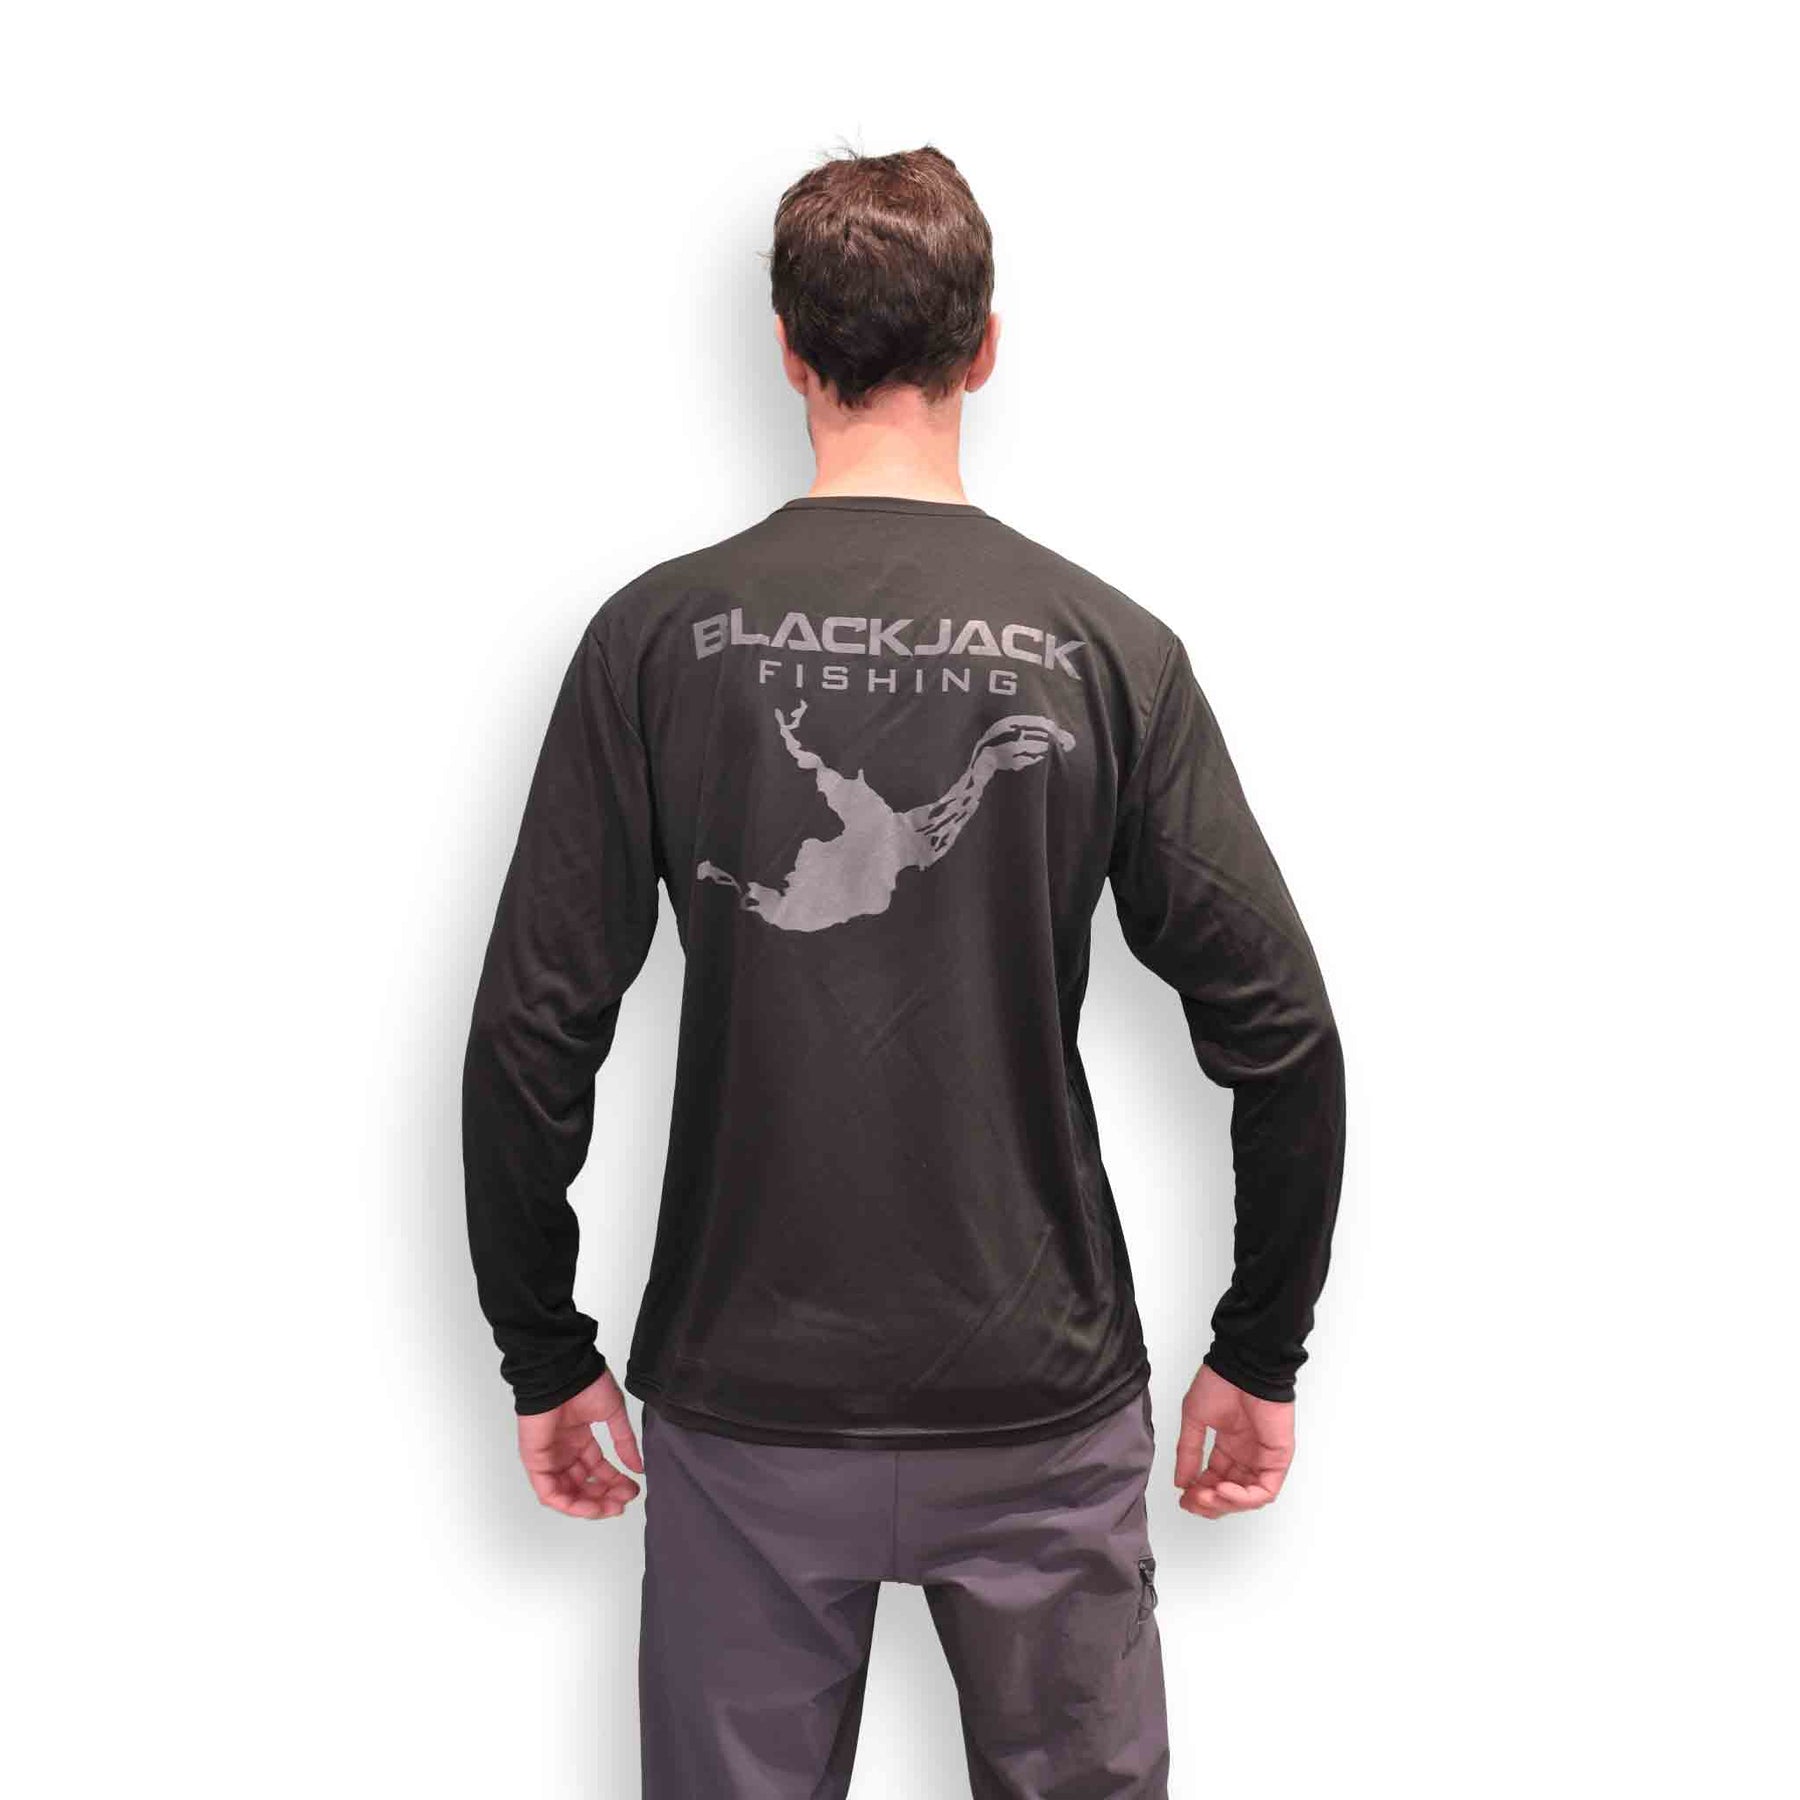 View of Long_Sleeves Black Jack Fishing Men's Long-Sleeve Cooling Sunshirt available at EZOKO Pike and Musky Shop